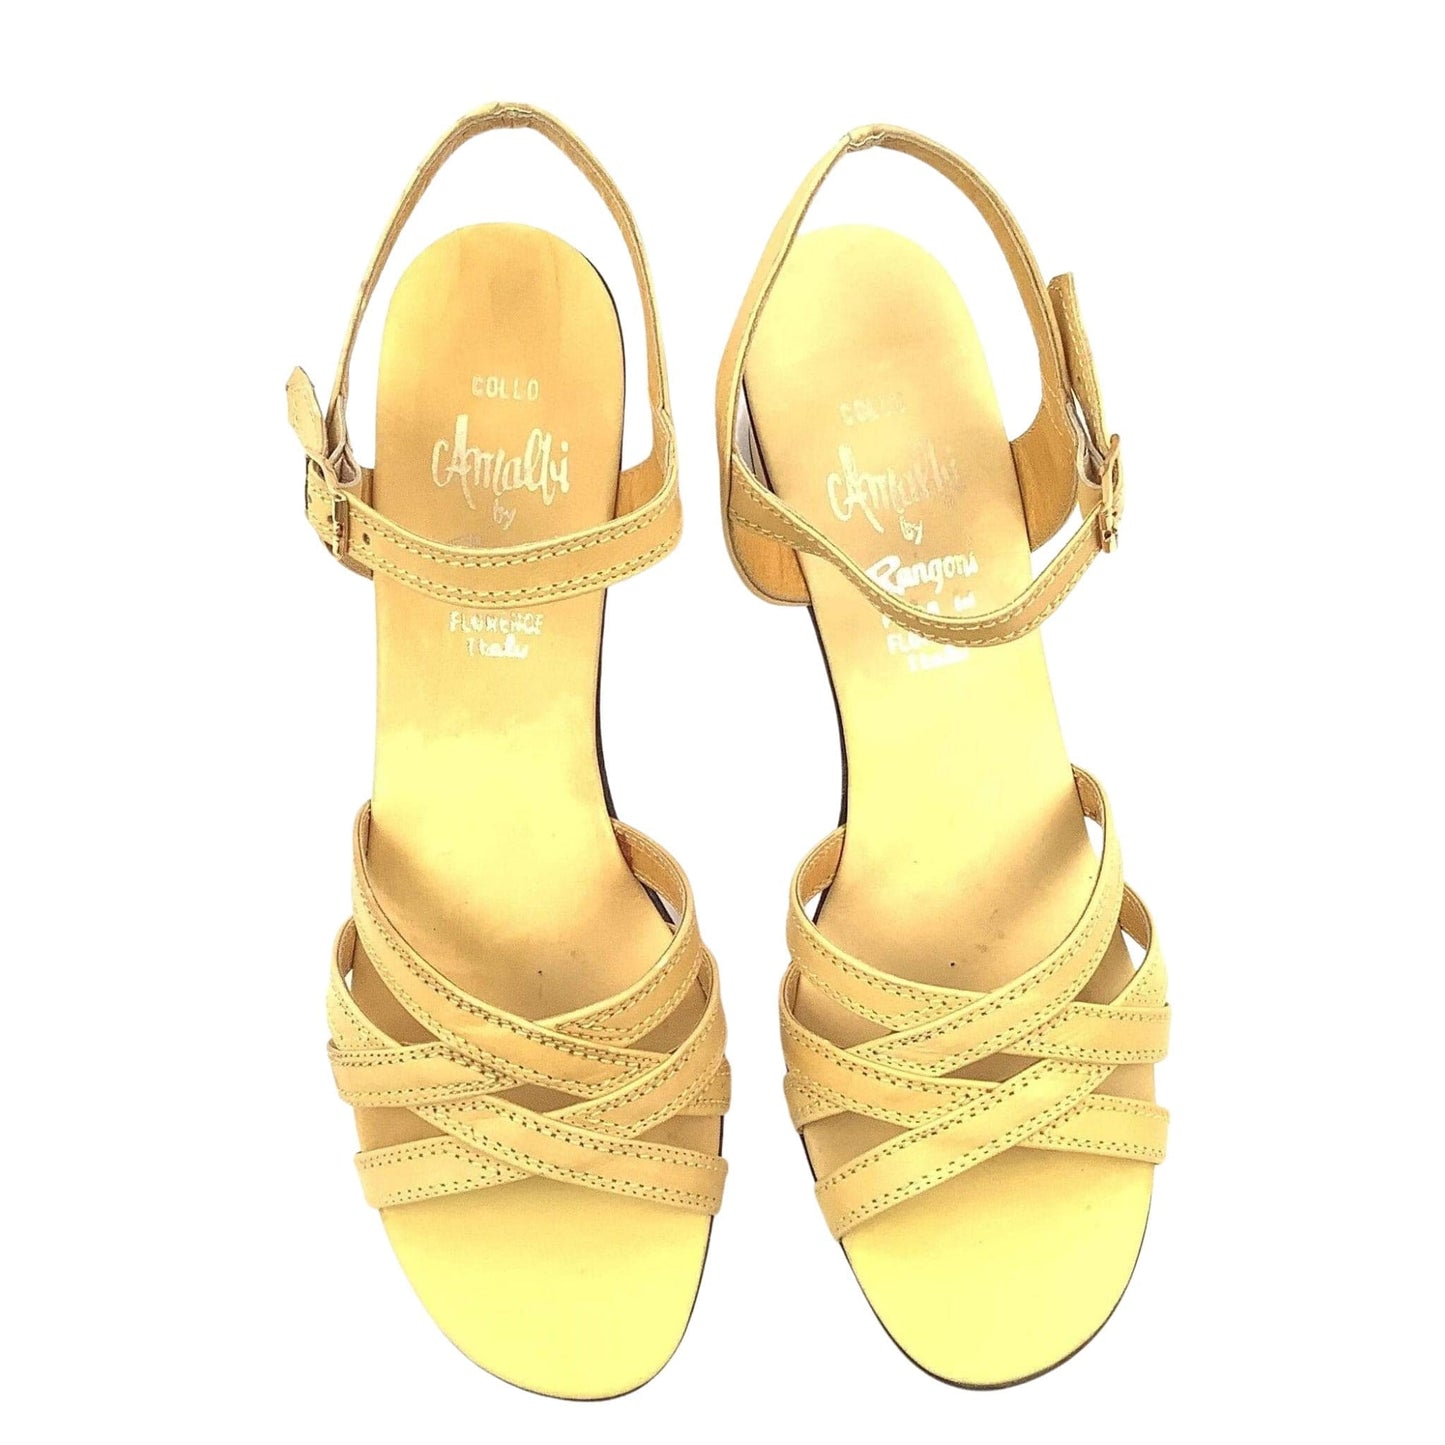 New Old Stock Yellow Sandals 7.5 / Yellow / Vintage 1980s